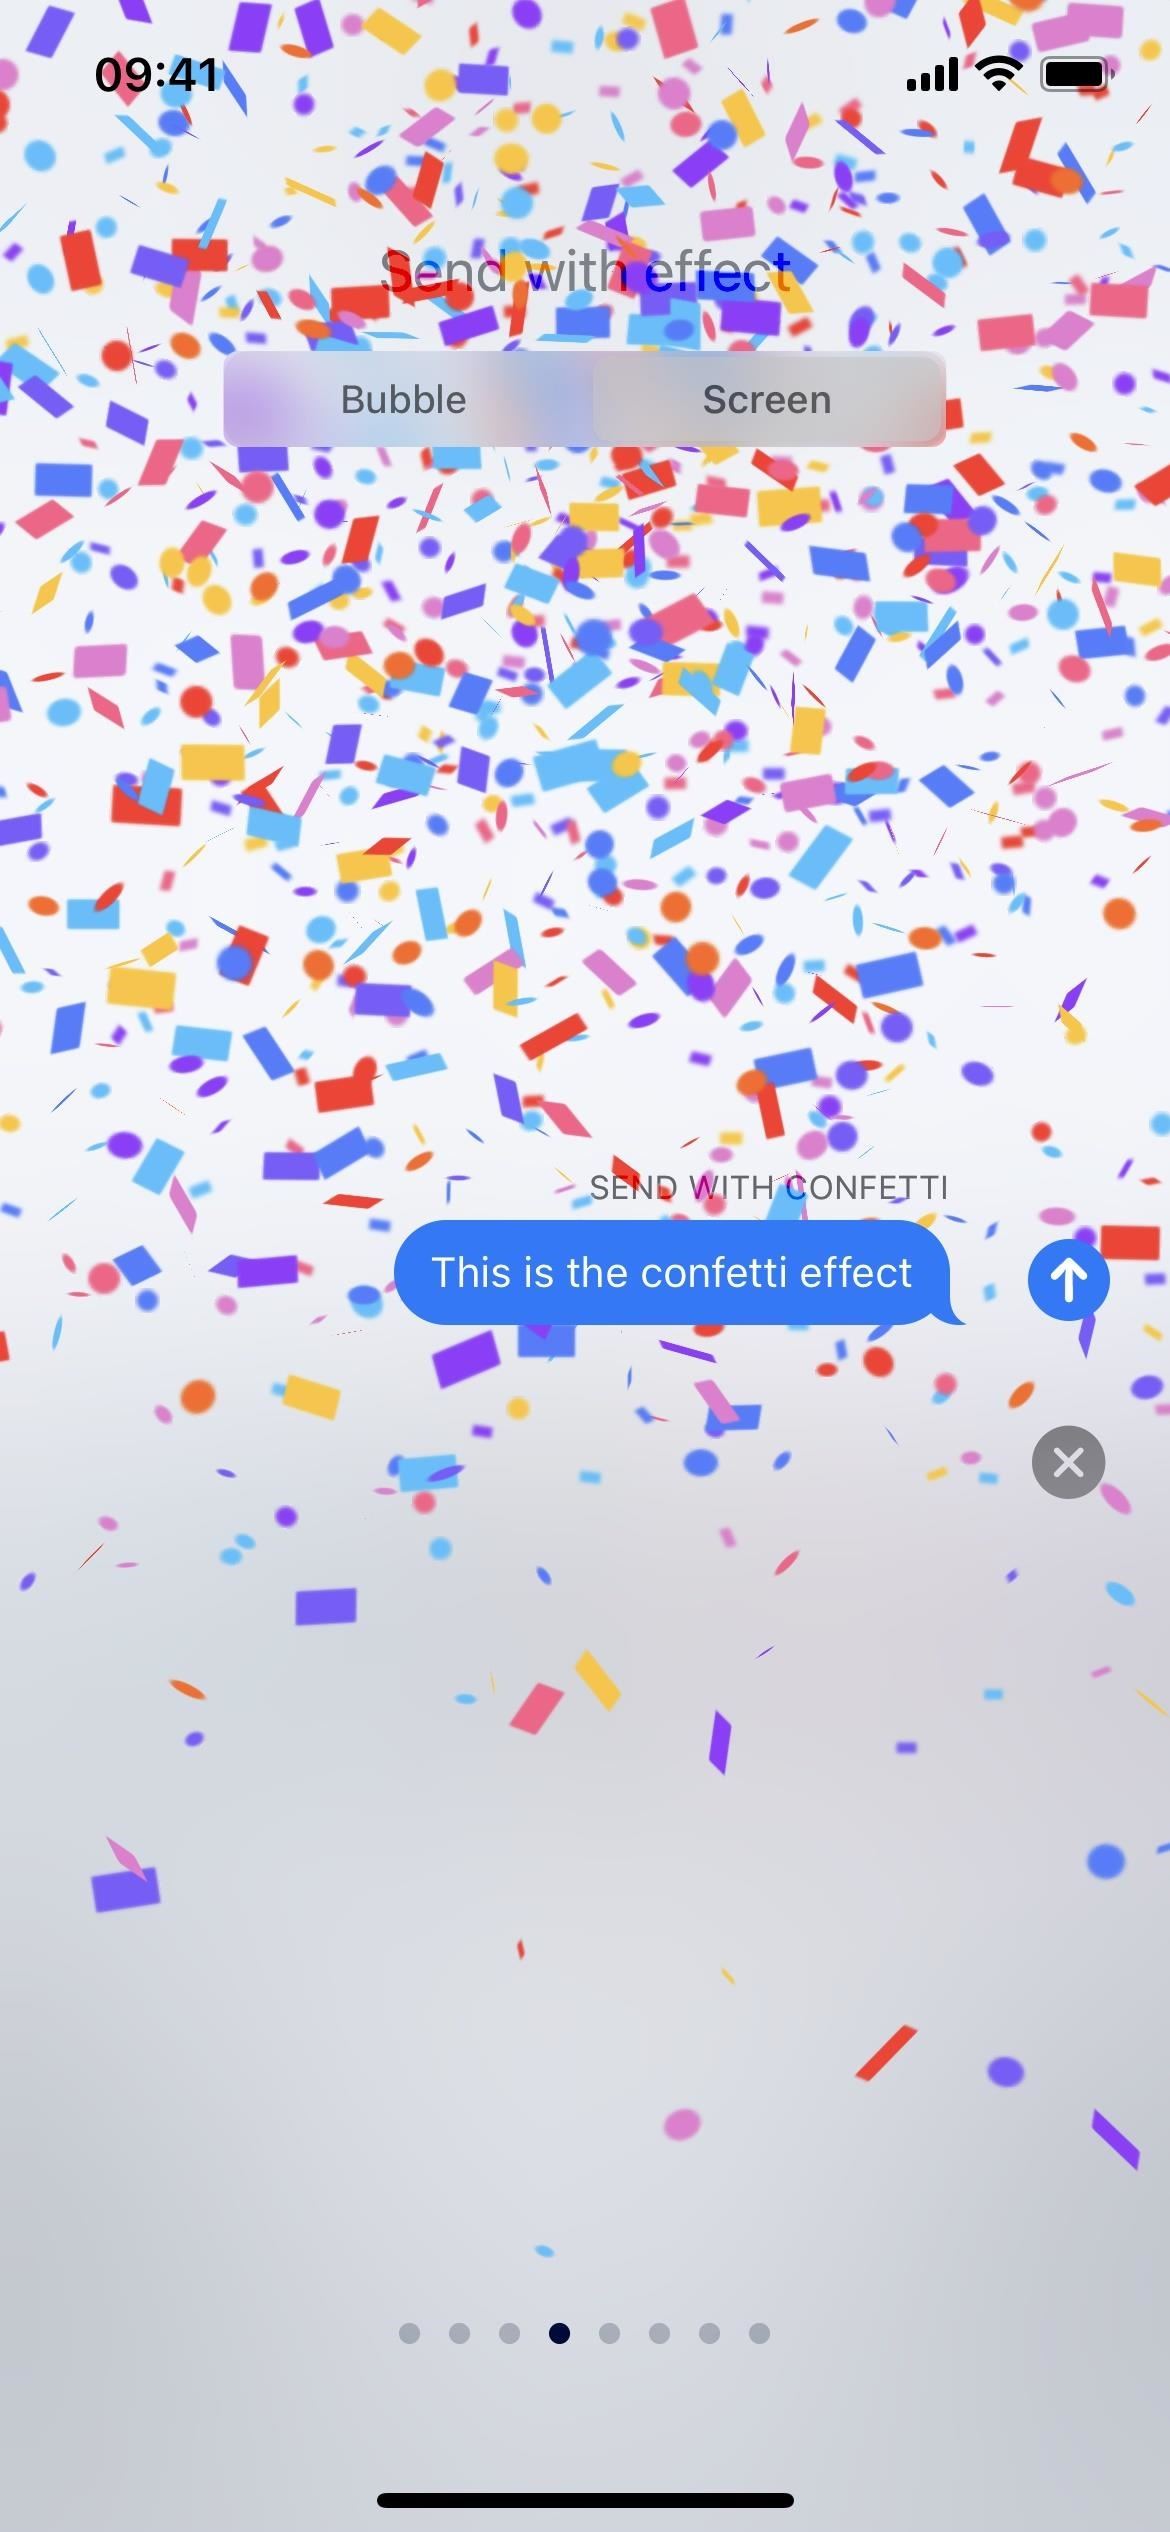 There's a Super Secret Message Effect for iMessage Chats — Here's How You Send It